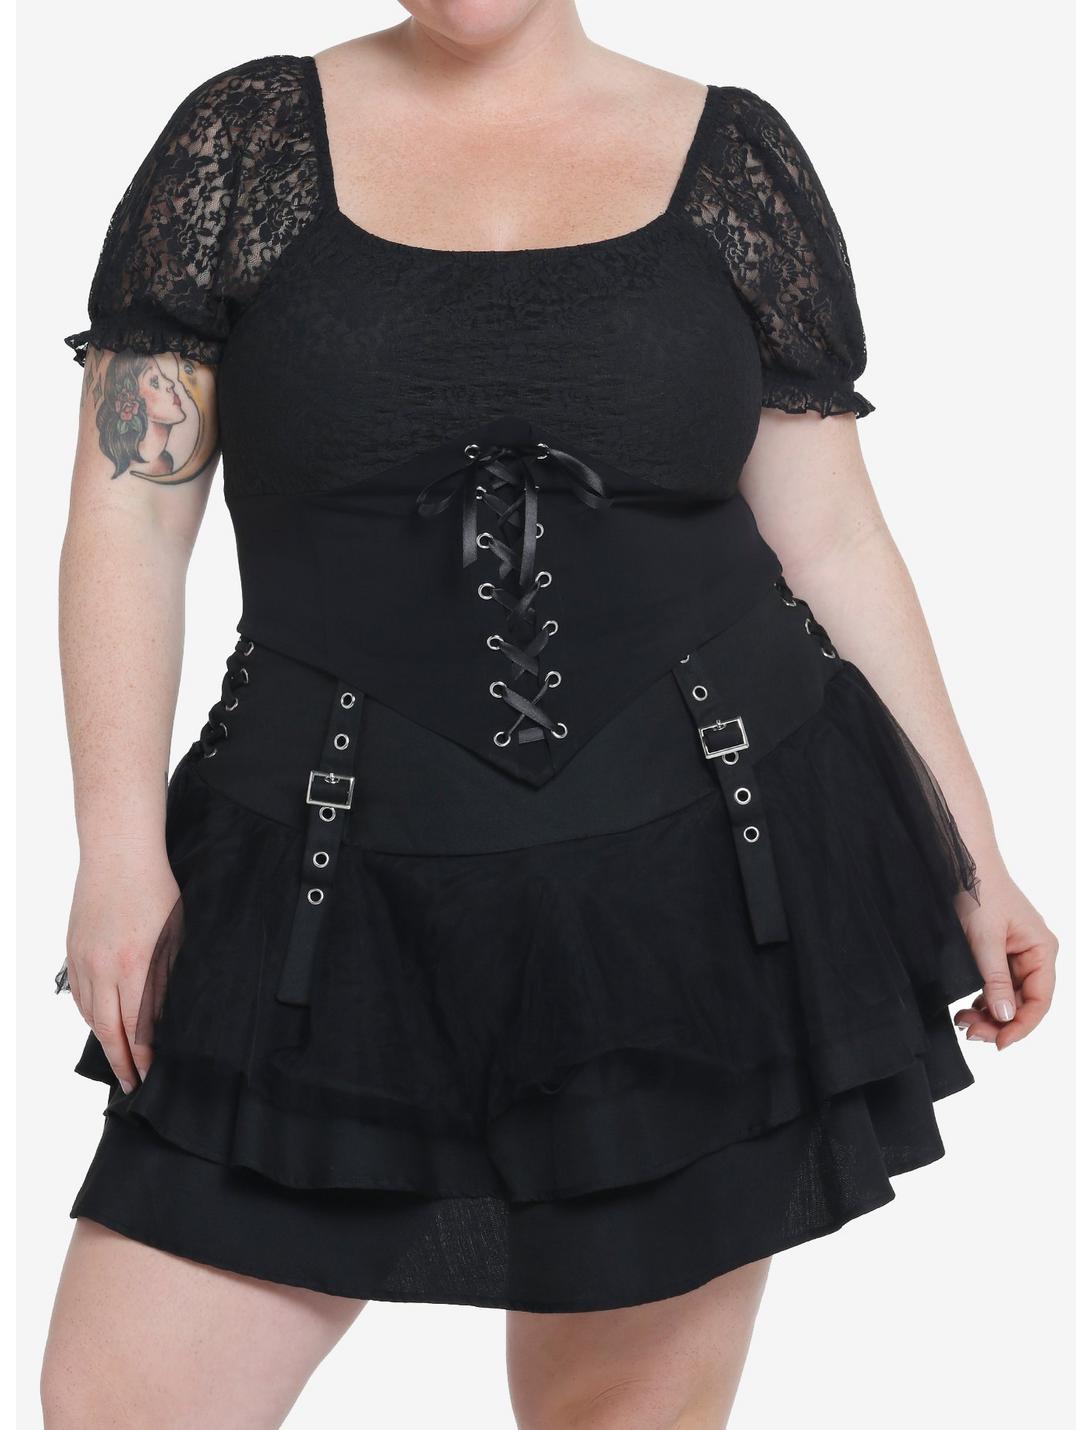 Thorn & Fable Black Lace-Up Pointed Top Plus Size, BLACK, hi-res